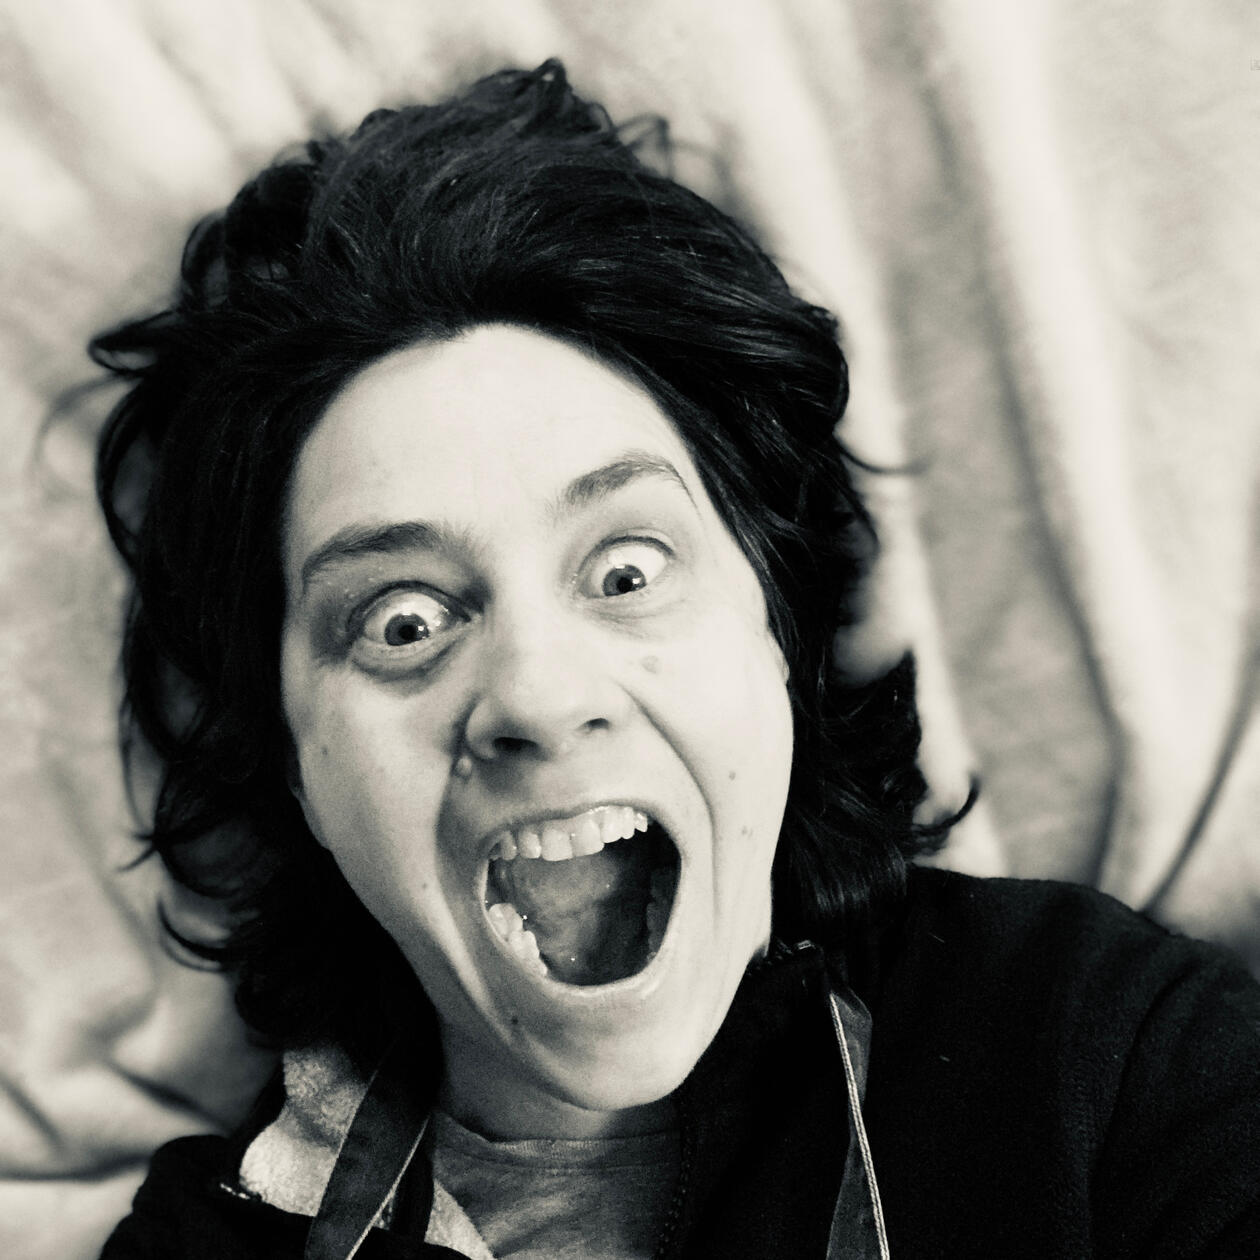 Last image in grid of self-portraits. Black and white photograph: Headshot dramatic look of surprise, eyes and mouth wide open. Taken from above lying down, so that hair is spread around as if surprised too.